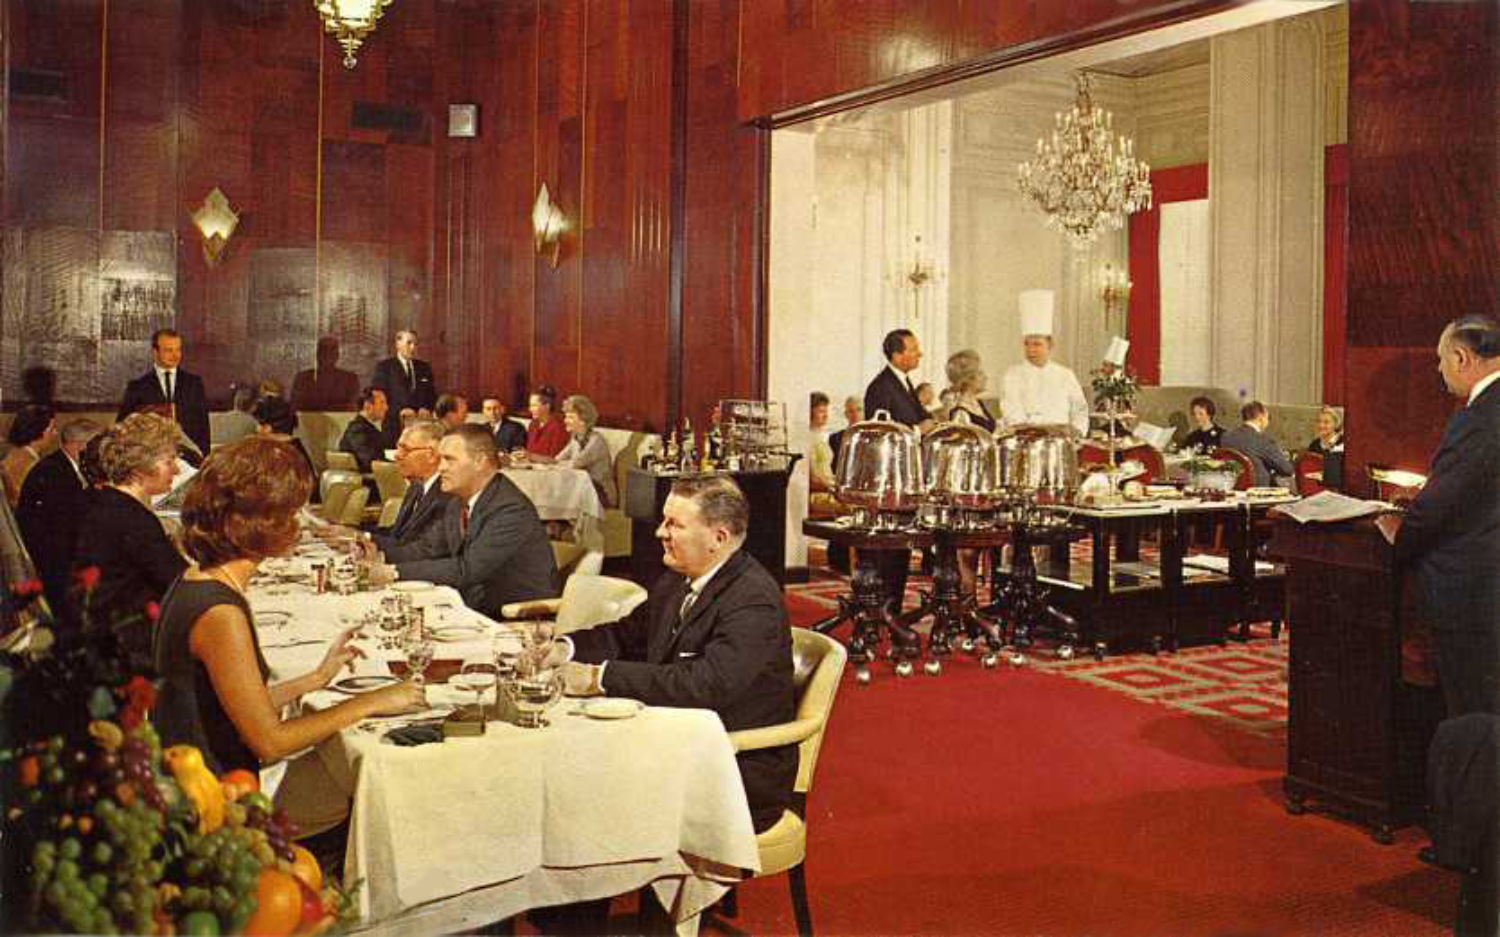 people having dinner, wooden walls, chandeliers, food on plates and glasses